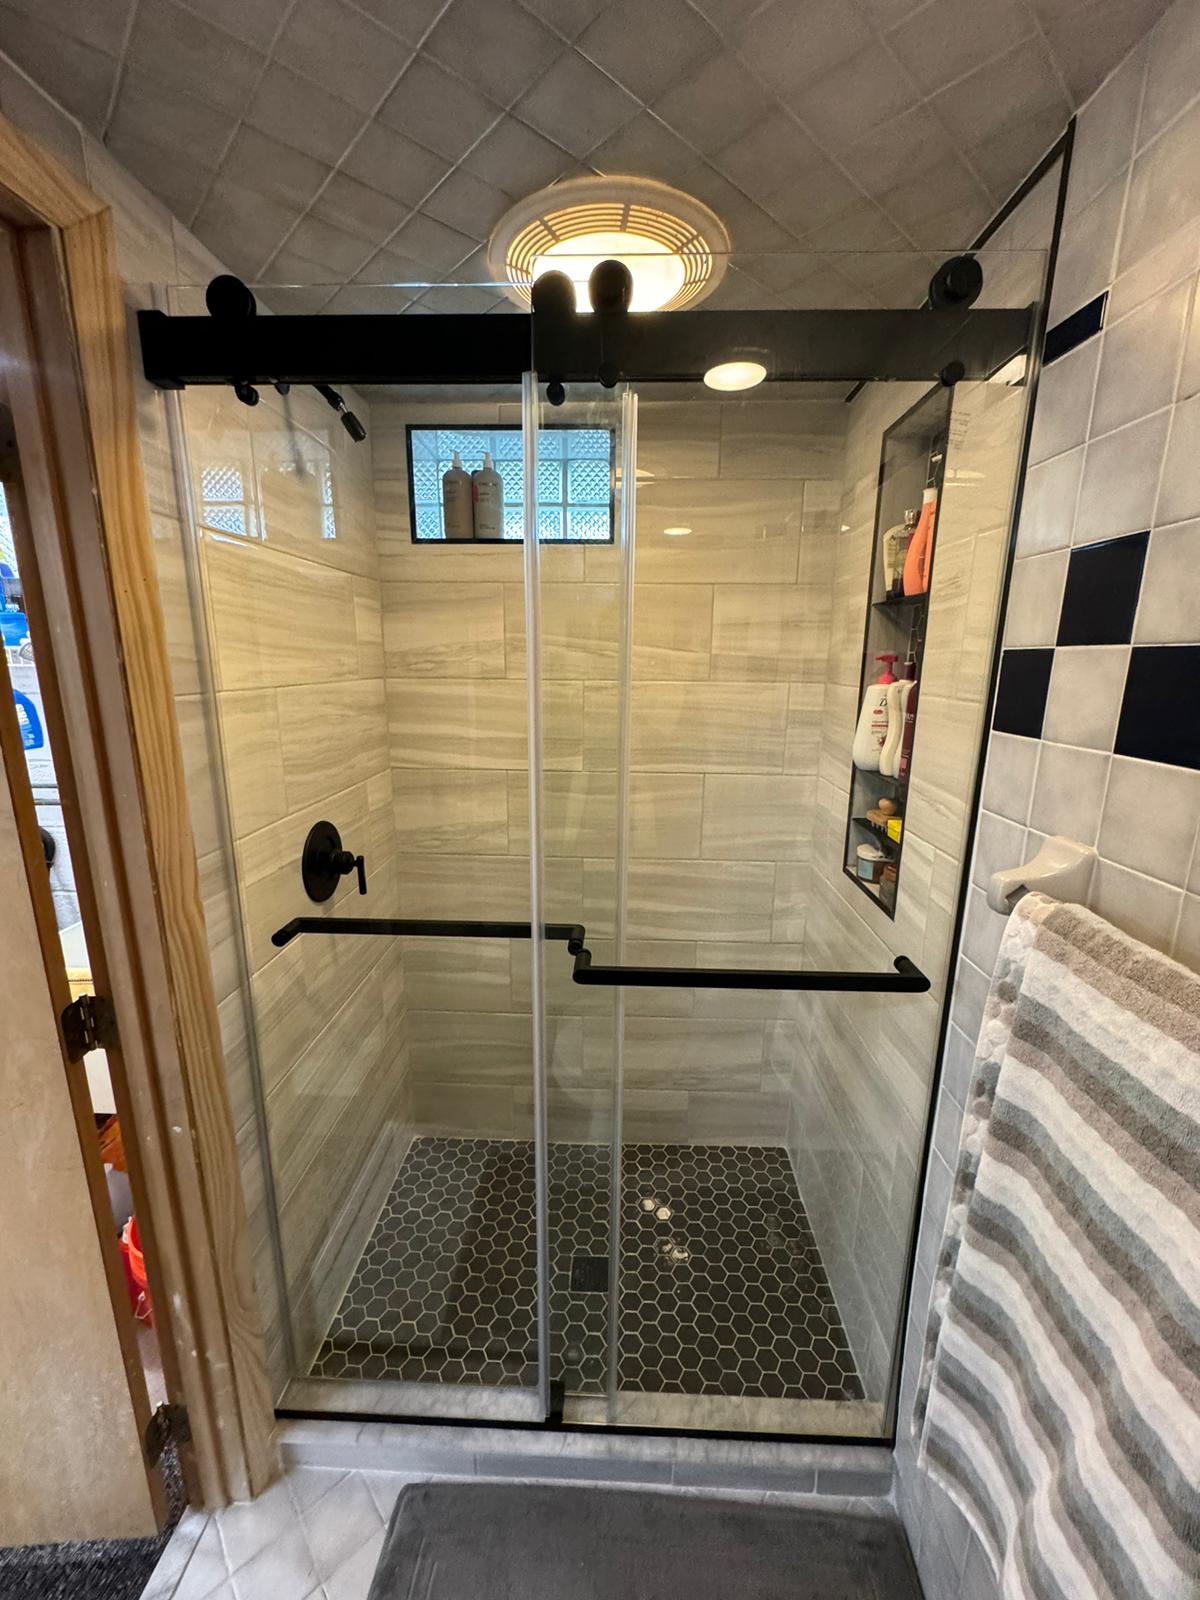 If you are looking for a bathroom remodel in Mentor, Our team of experts is here to transform your bathroom into a stunning and functional space.